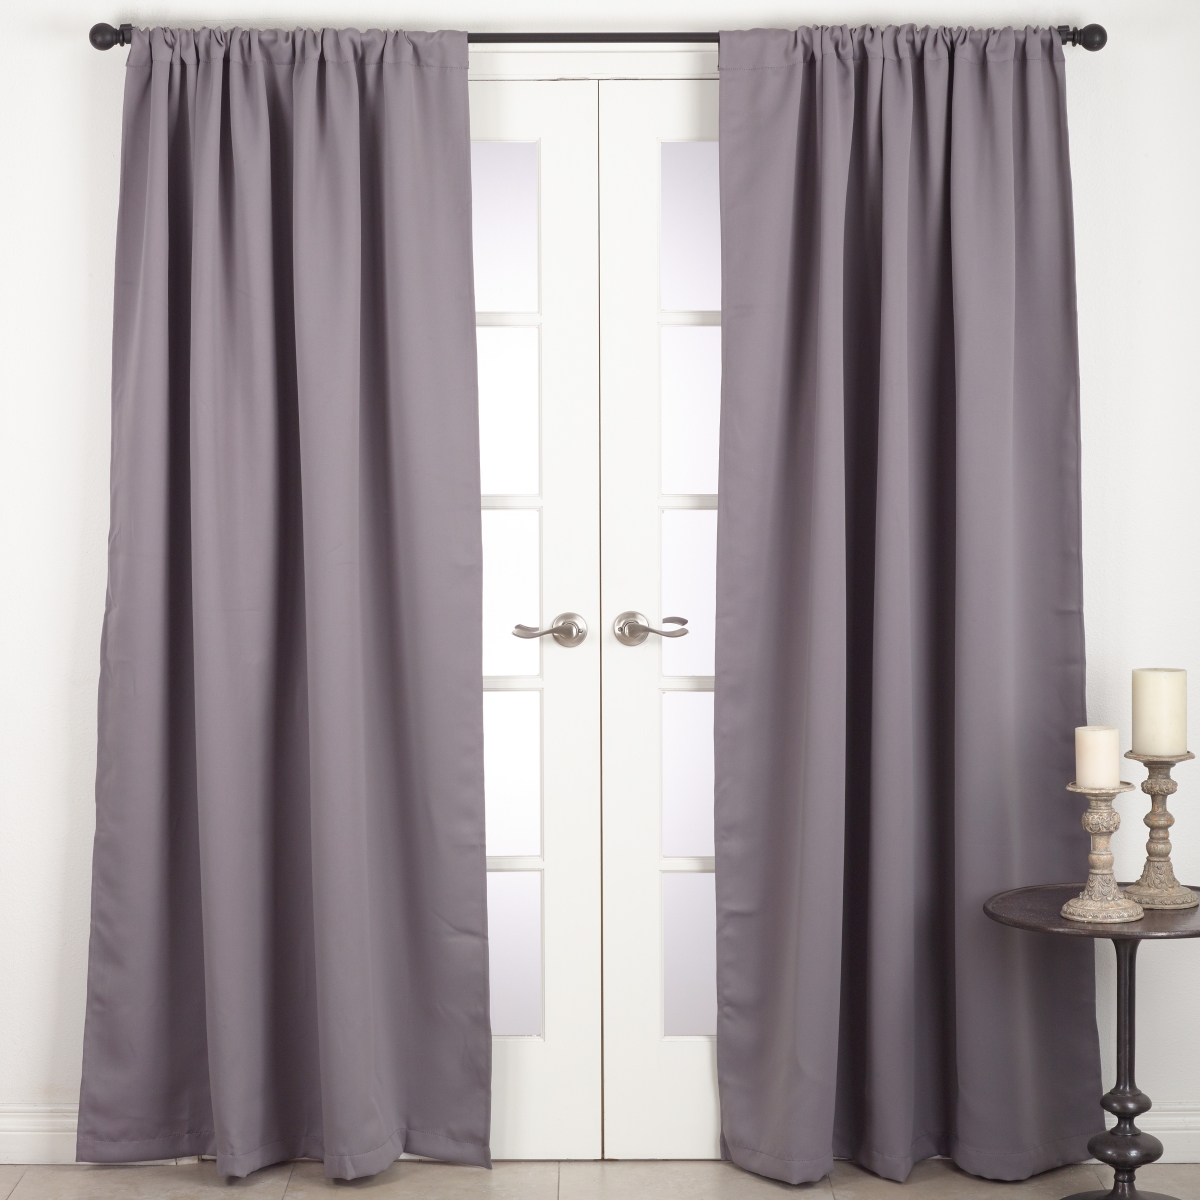 C115.gy54108 54 X 108 In. Solid Rod Pocket Blackout Window Curtain Panel, Grey